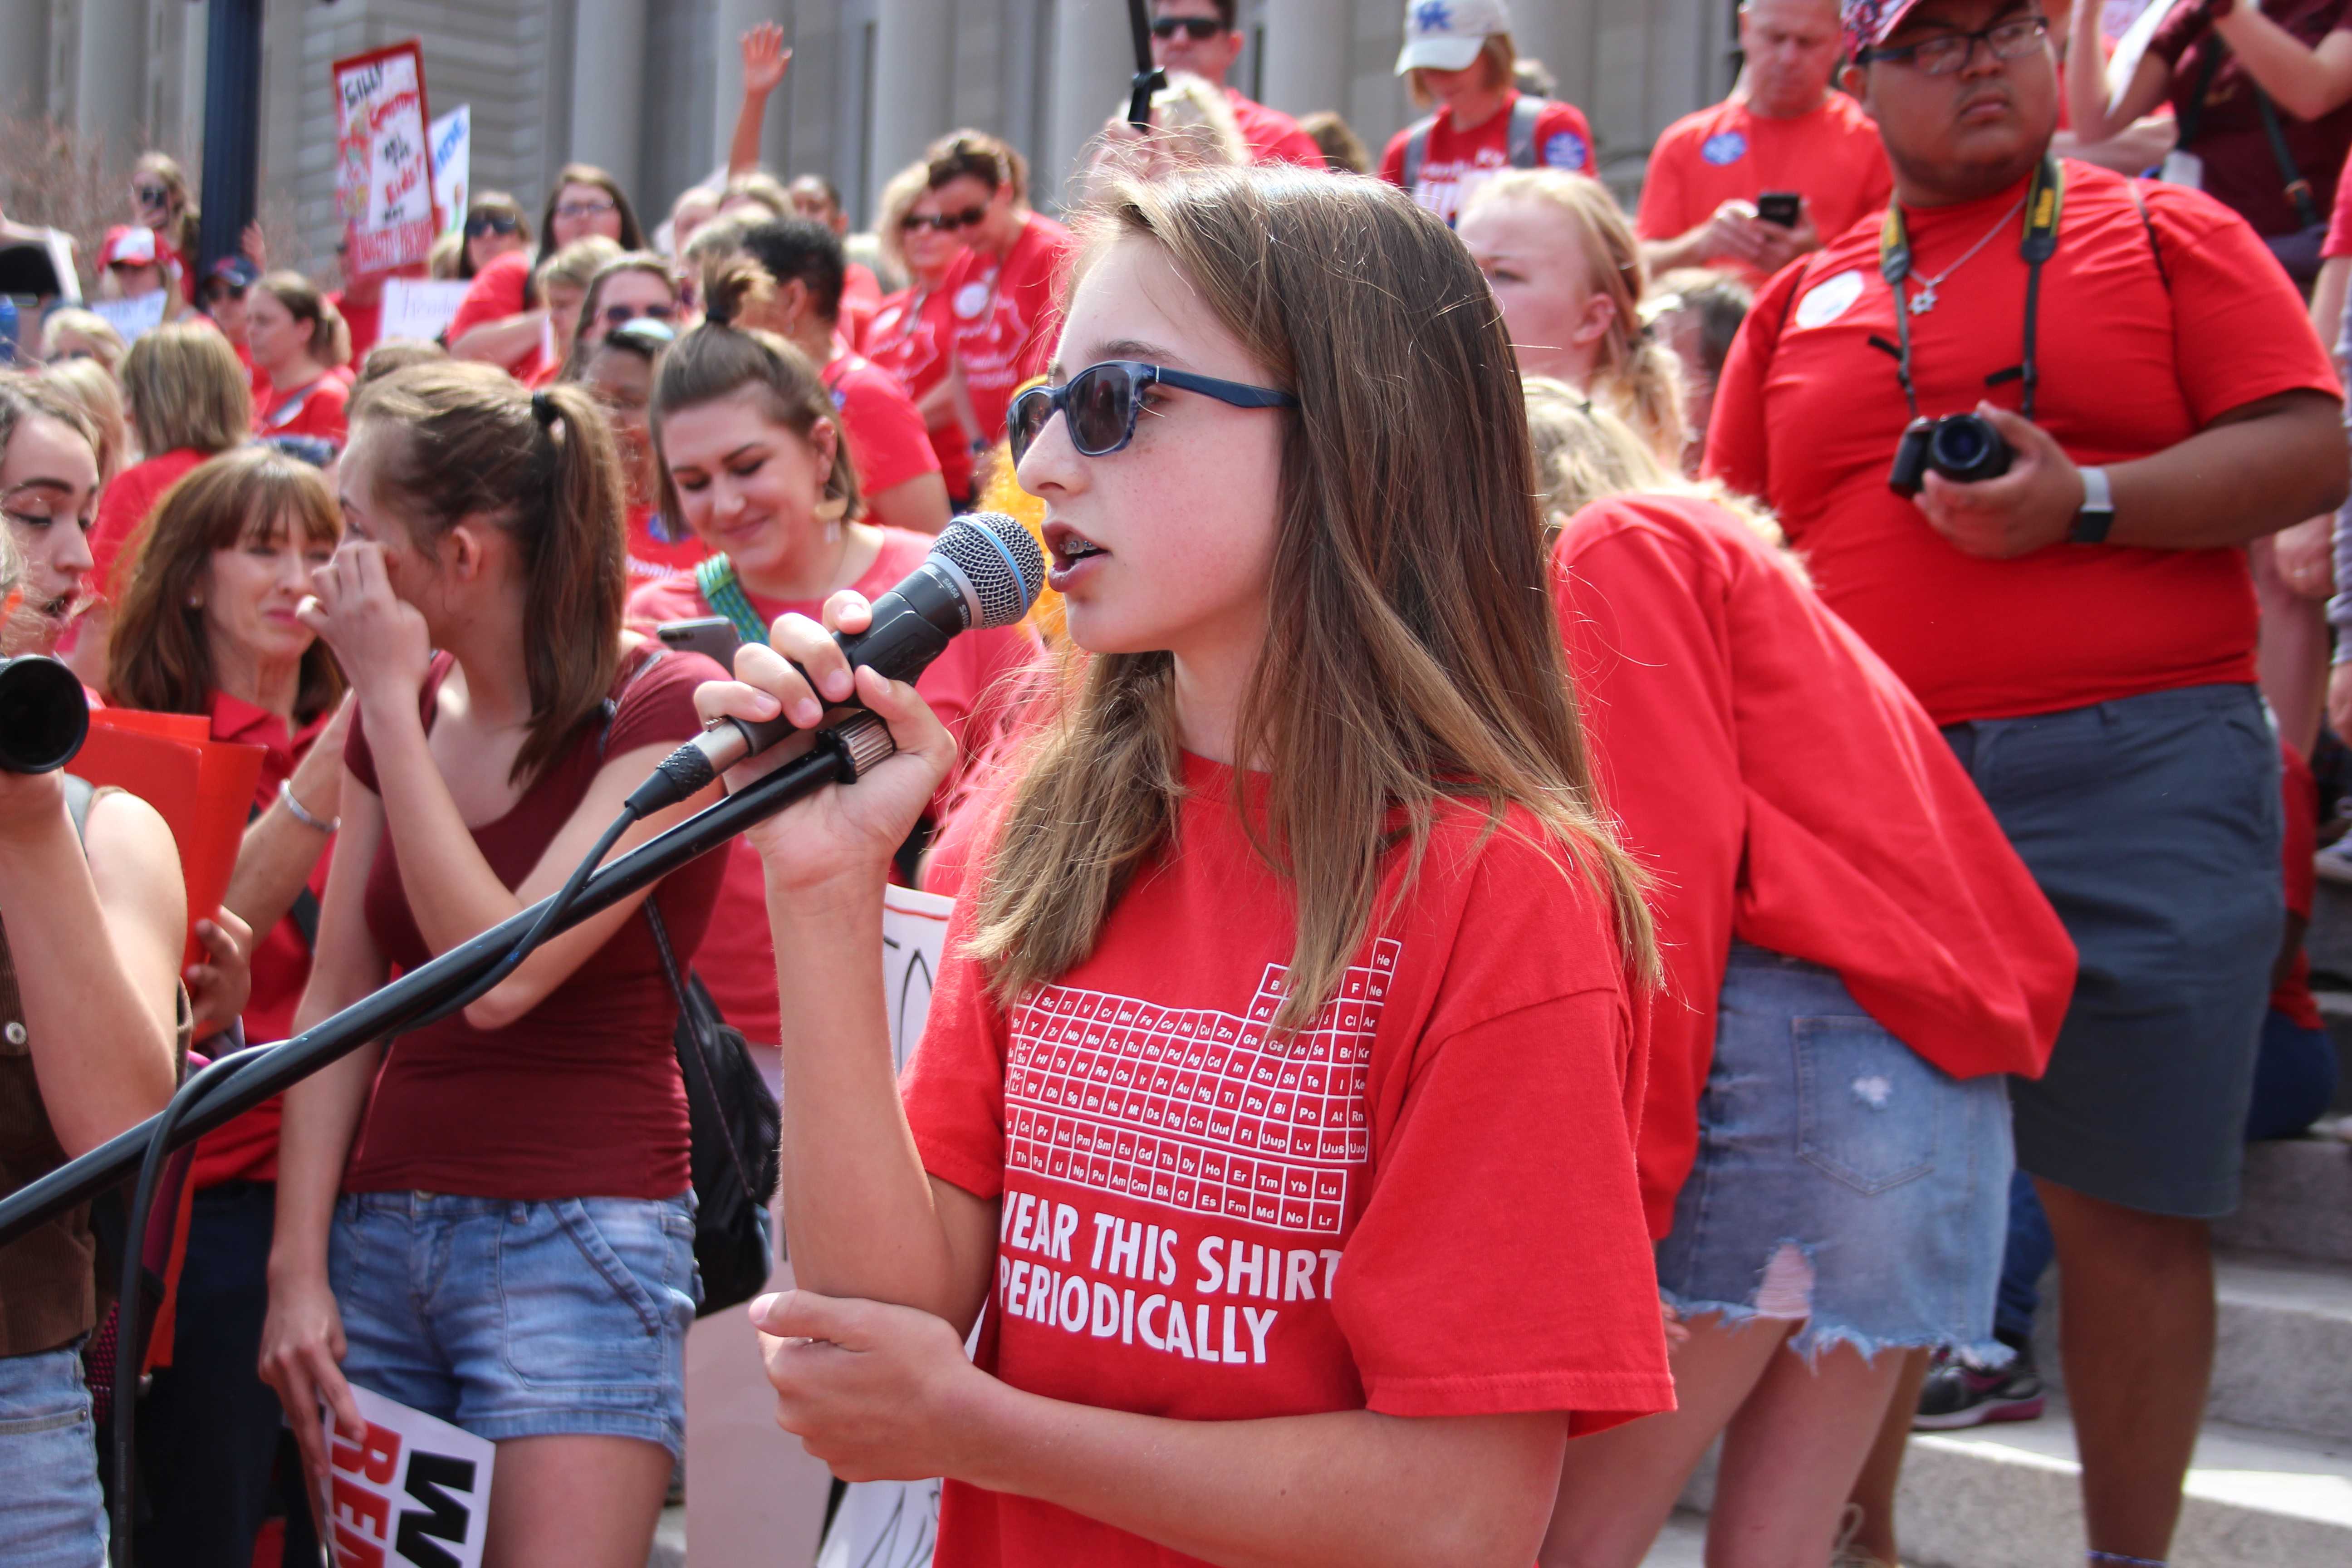 A 7th grader from Meyzeek Middle School speaking to the crowd. Photo by Jade Broderick.